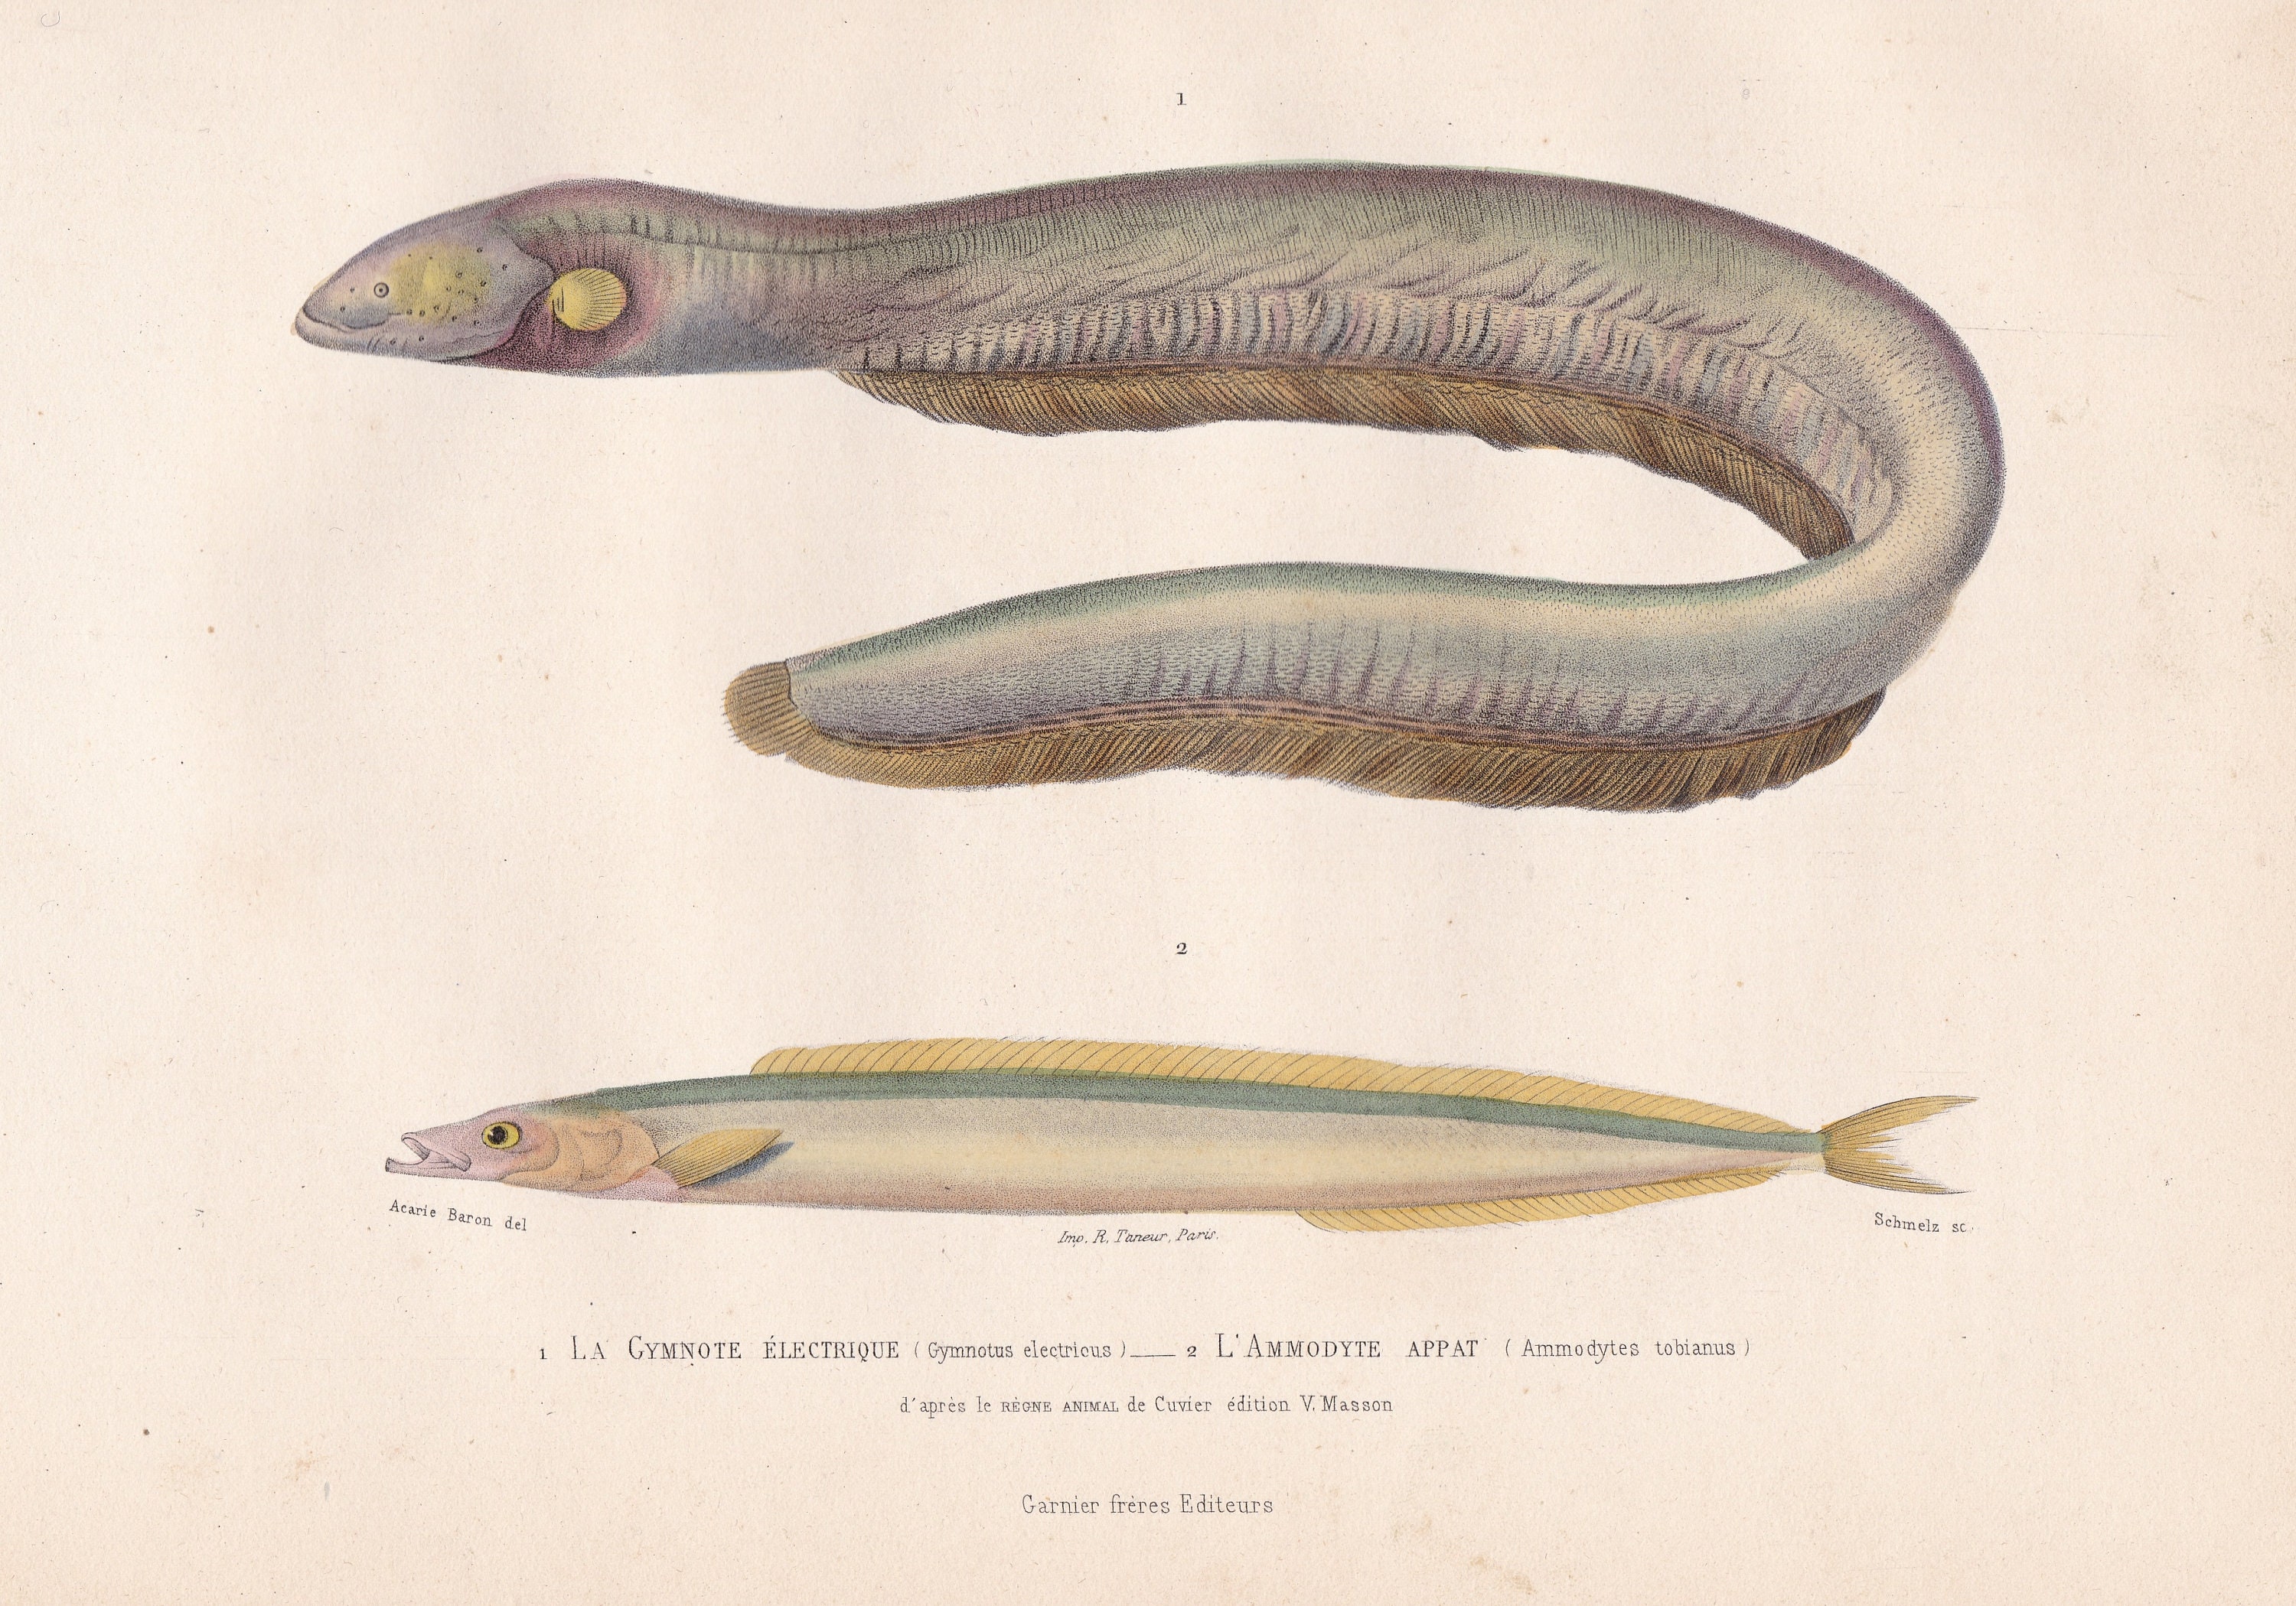 Original Antique Electric Eel Sand Lance Fish Print French Engraving Hand Colored Cuvier Lacepede Buffon Histoire Naturelle 1836